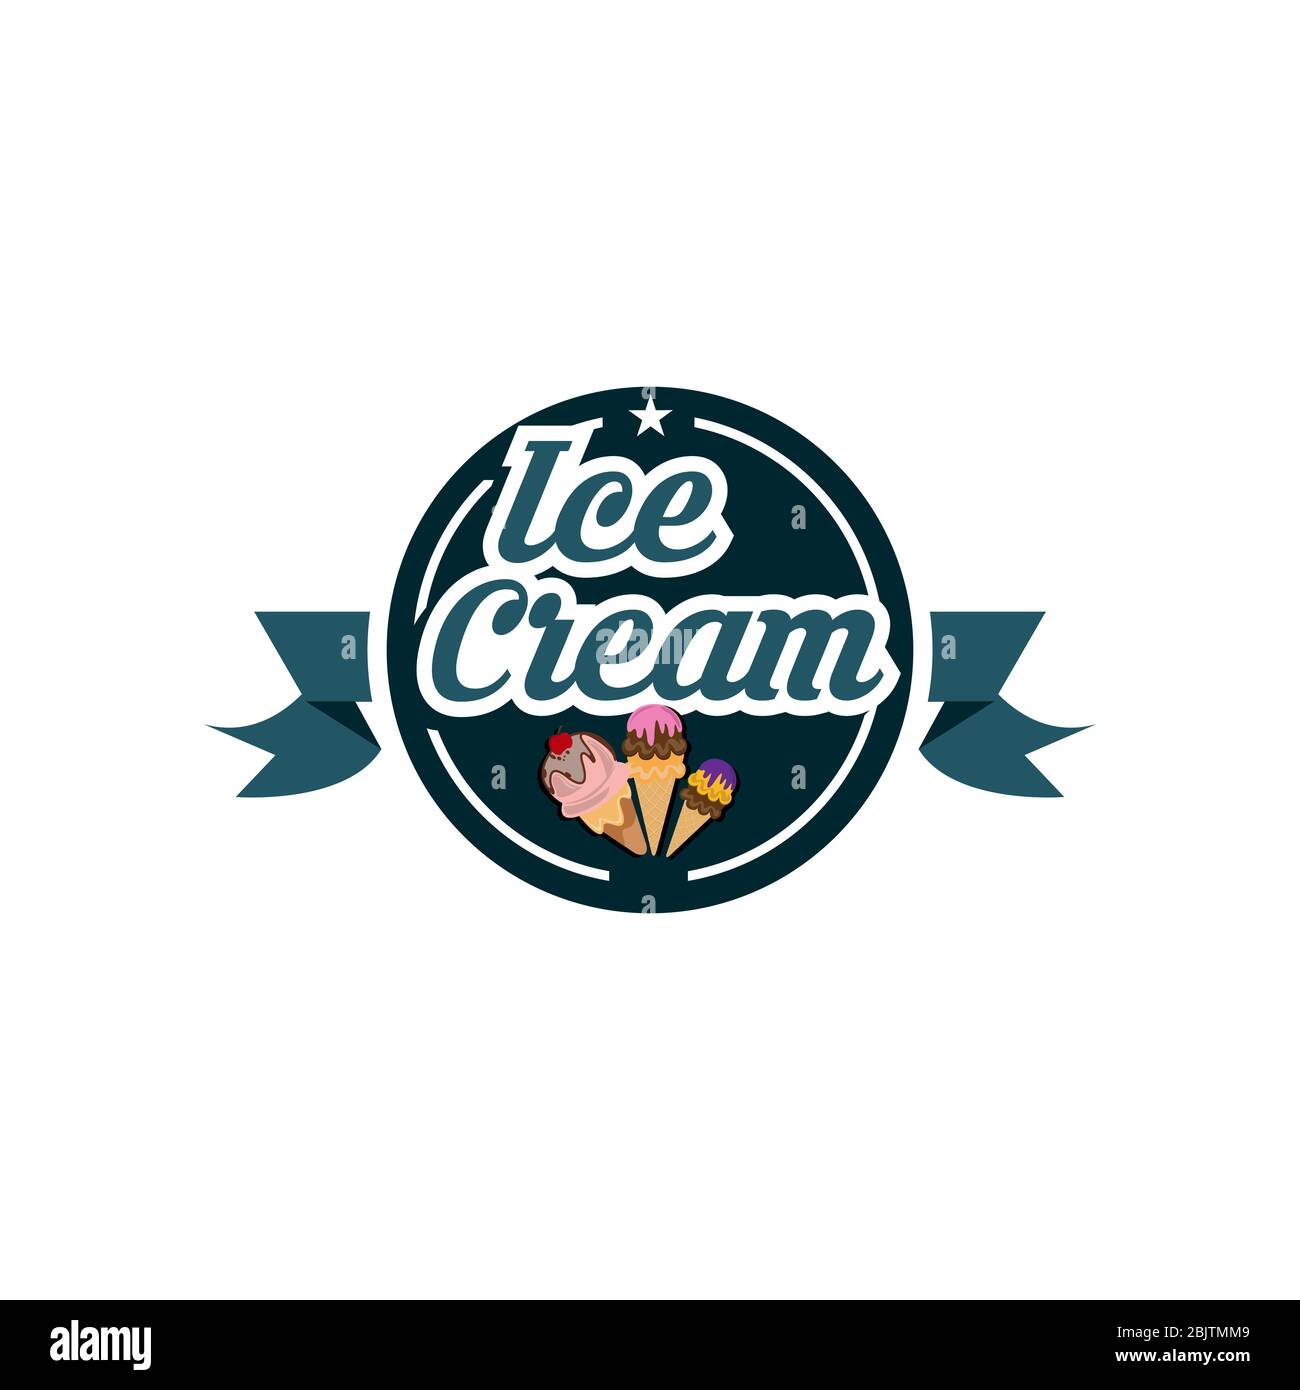 Reate a beautiful ice cream shop logo design for source file by  Agnes_burgess | Fiverr